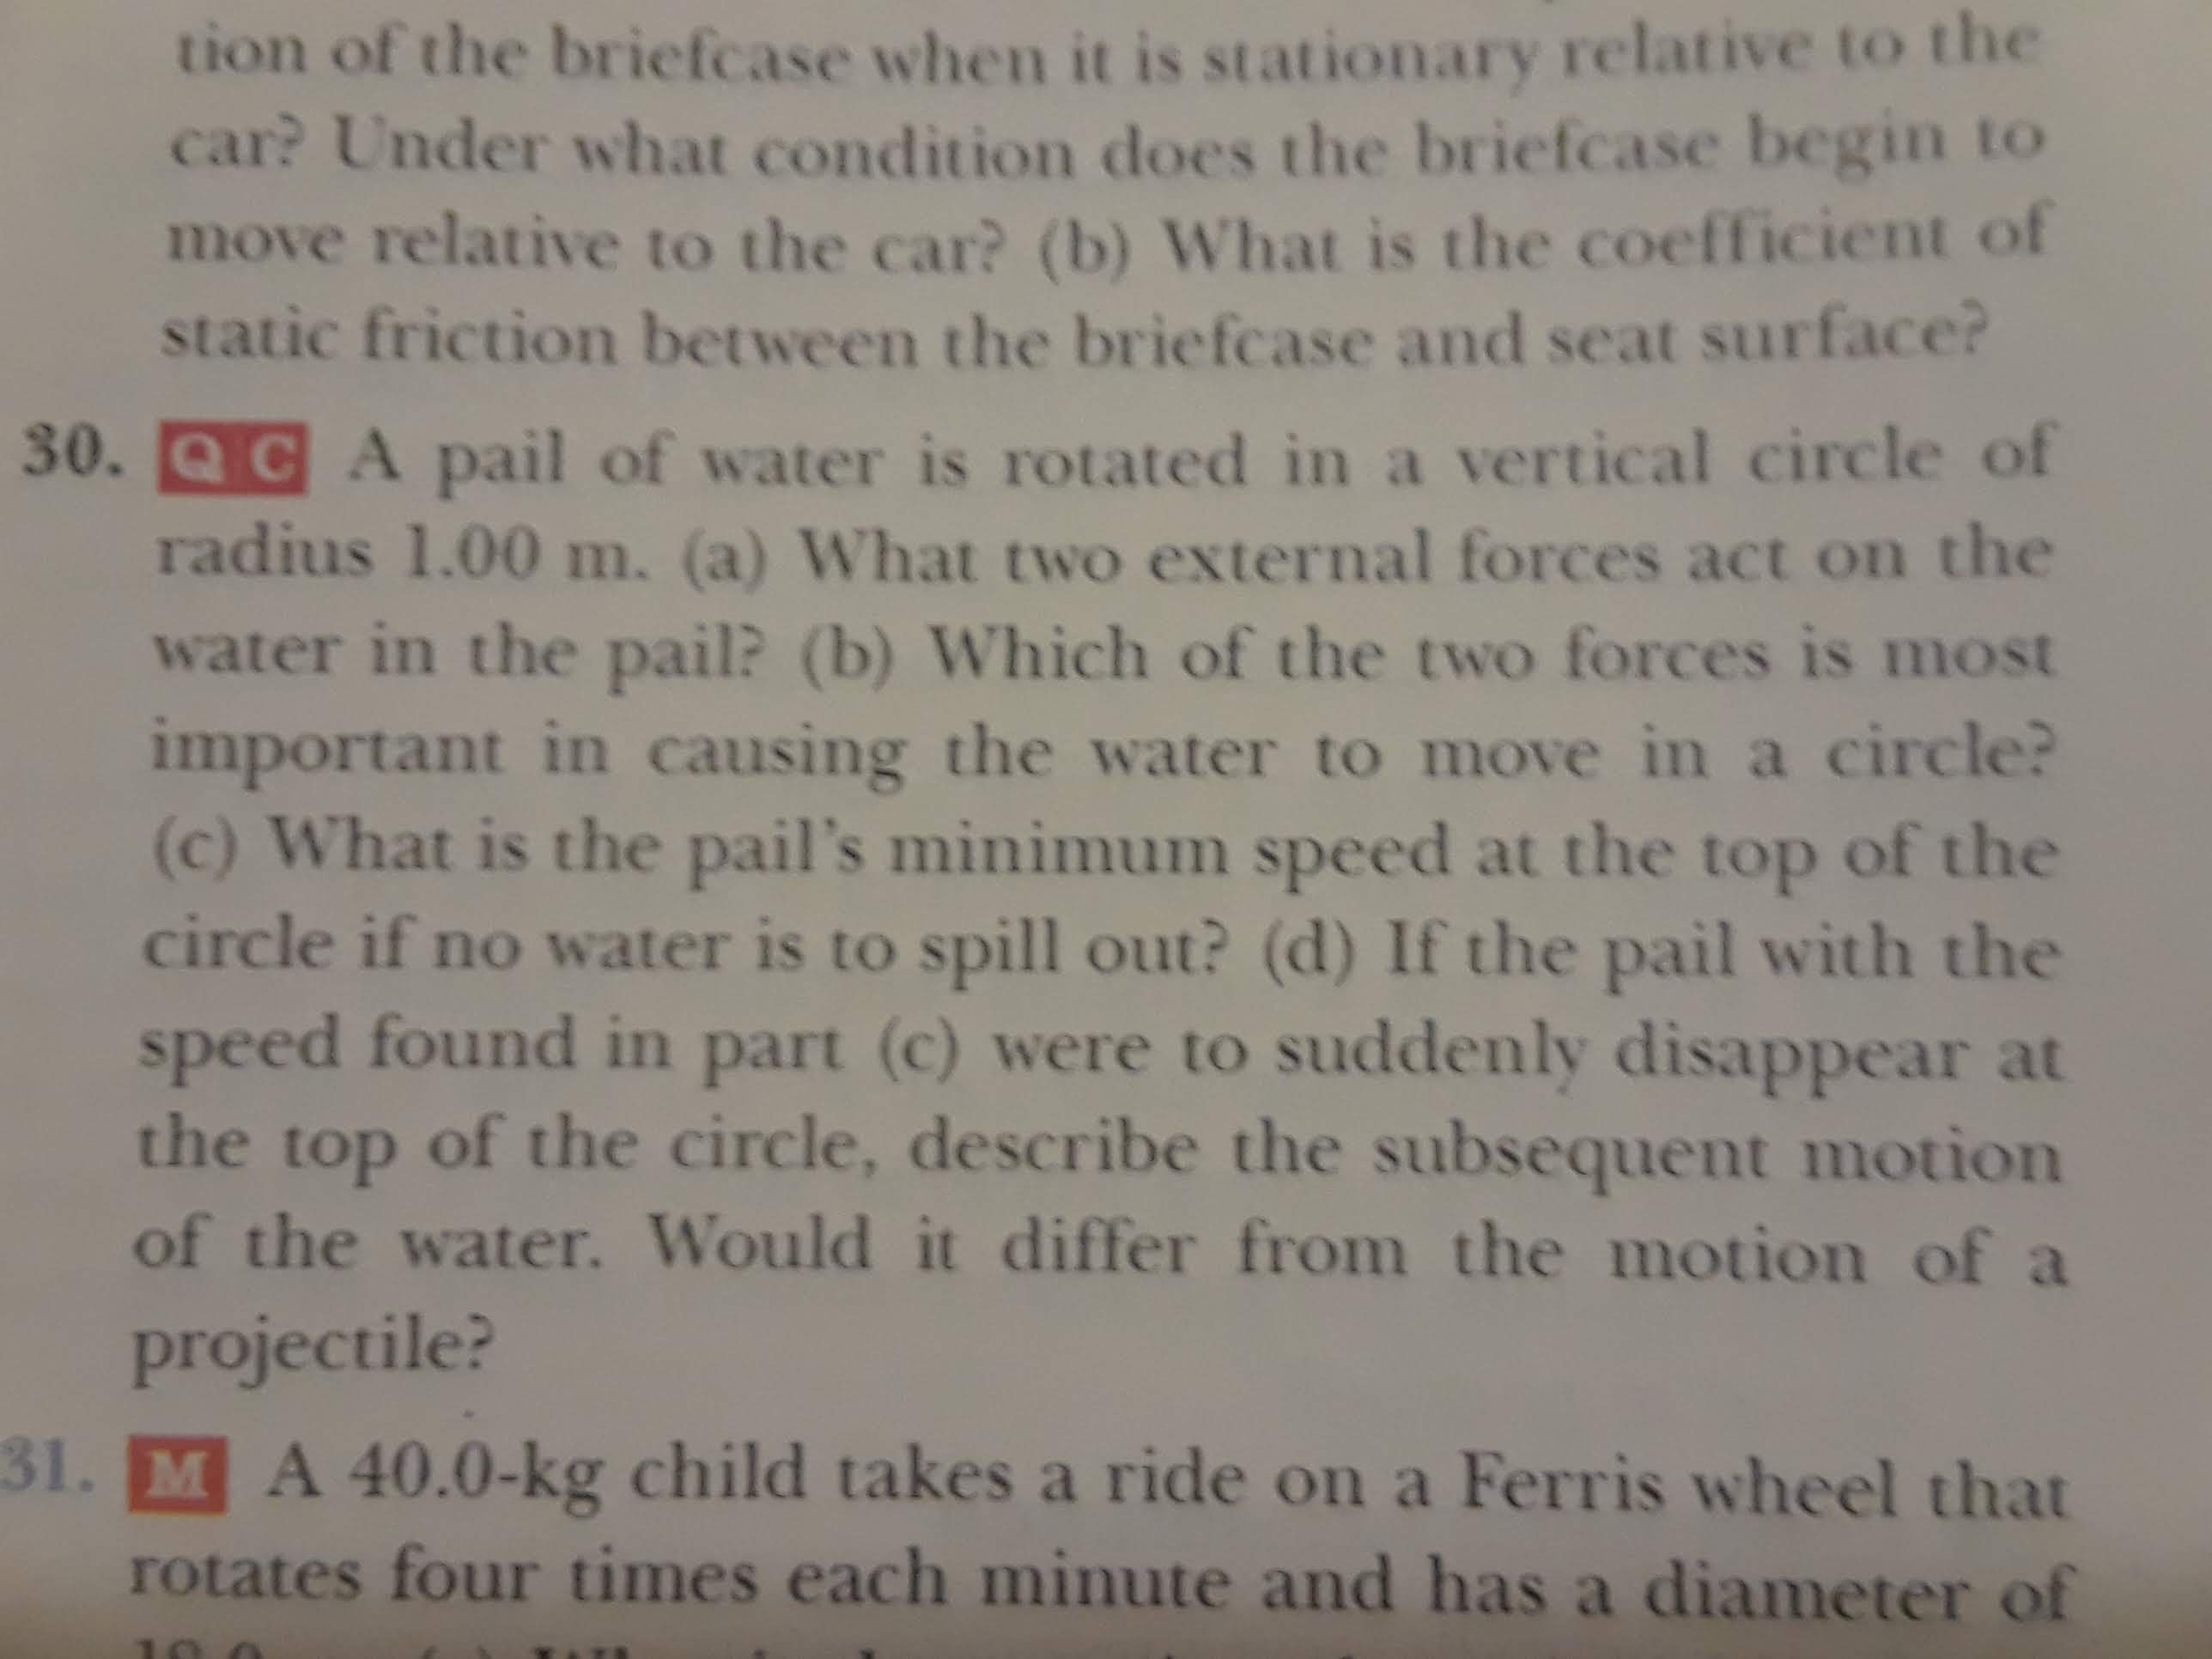 tion of the briefcase when it is stationary relative to the
car? Under what condition does the briefcase begin to
move relative to the car? (b) What is the coefficient of
static friction between the briefcase and seat surface?
30. QCA pail of water is rotated in a vertical circle of
radius 1.00 m. (a) What two external forces act on the
water in the pail? (b) Which of the two forces is most
important in causing the water to move in a circle?
(c) What is the pail's minimum speed at the top of the
circle if no water is to spill out? (d) If the pail with the
speed found in part (c) were to suddenly disappear at
the top of the circle, describe the subsequent motion
of the water. Would it differ from the motion of a
projectile?
31. MA 40.0-kg child takes a ride on a Ferris wheel that
rotates four times each minute and has a diameter of
